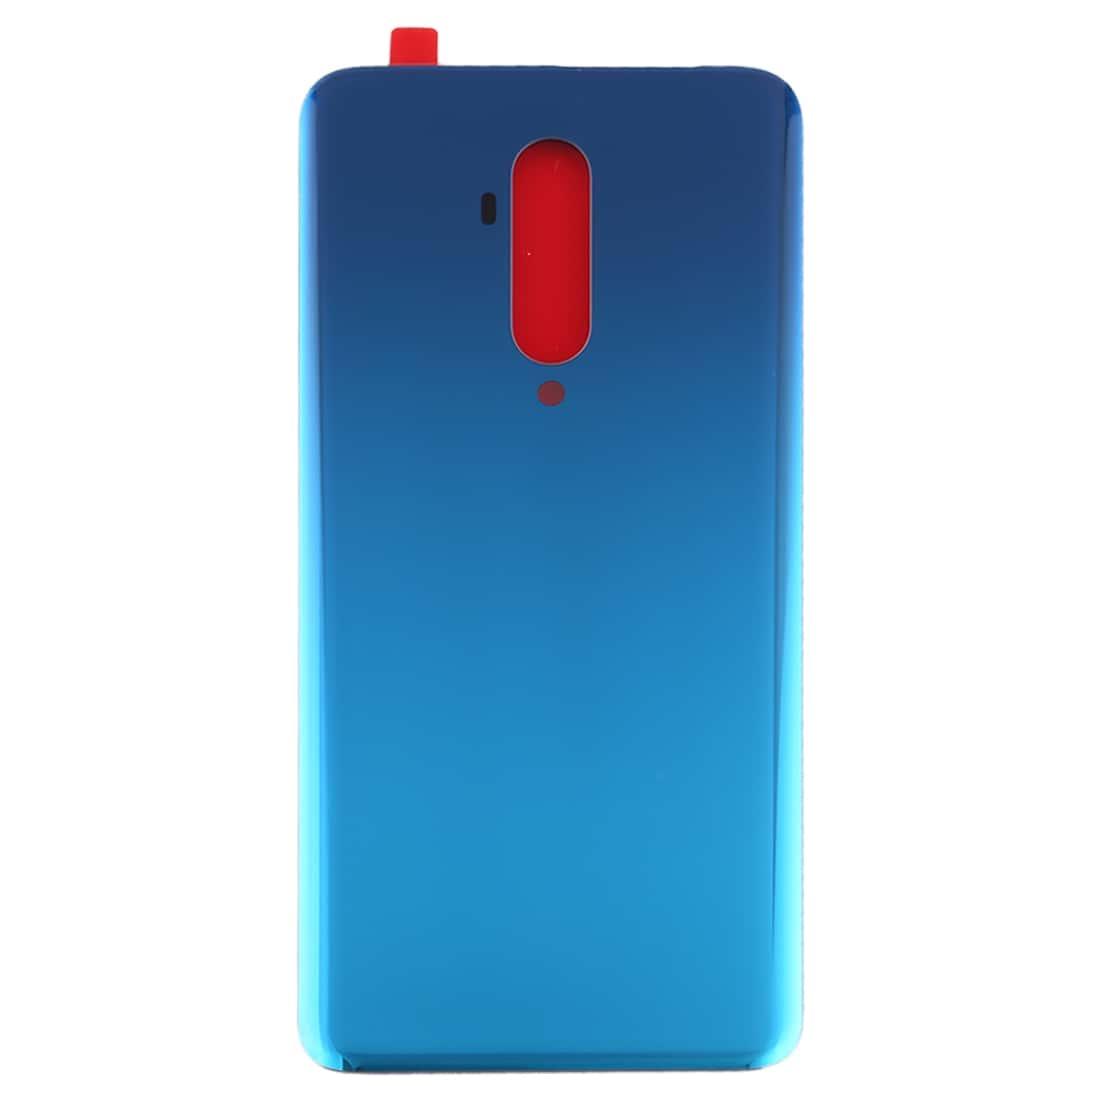 Back Glass Panel for  Oneplus 7T Pro Blue